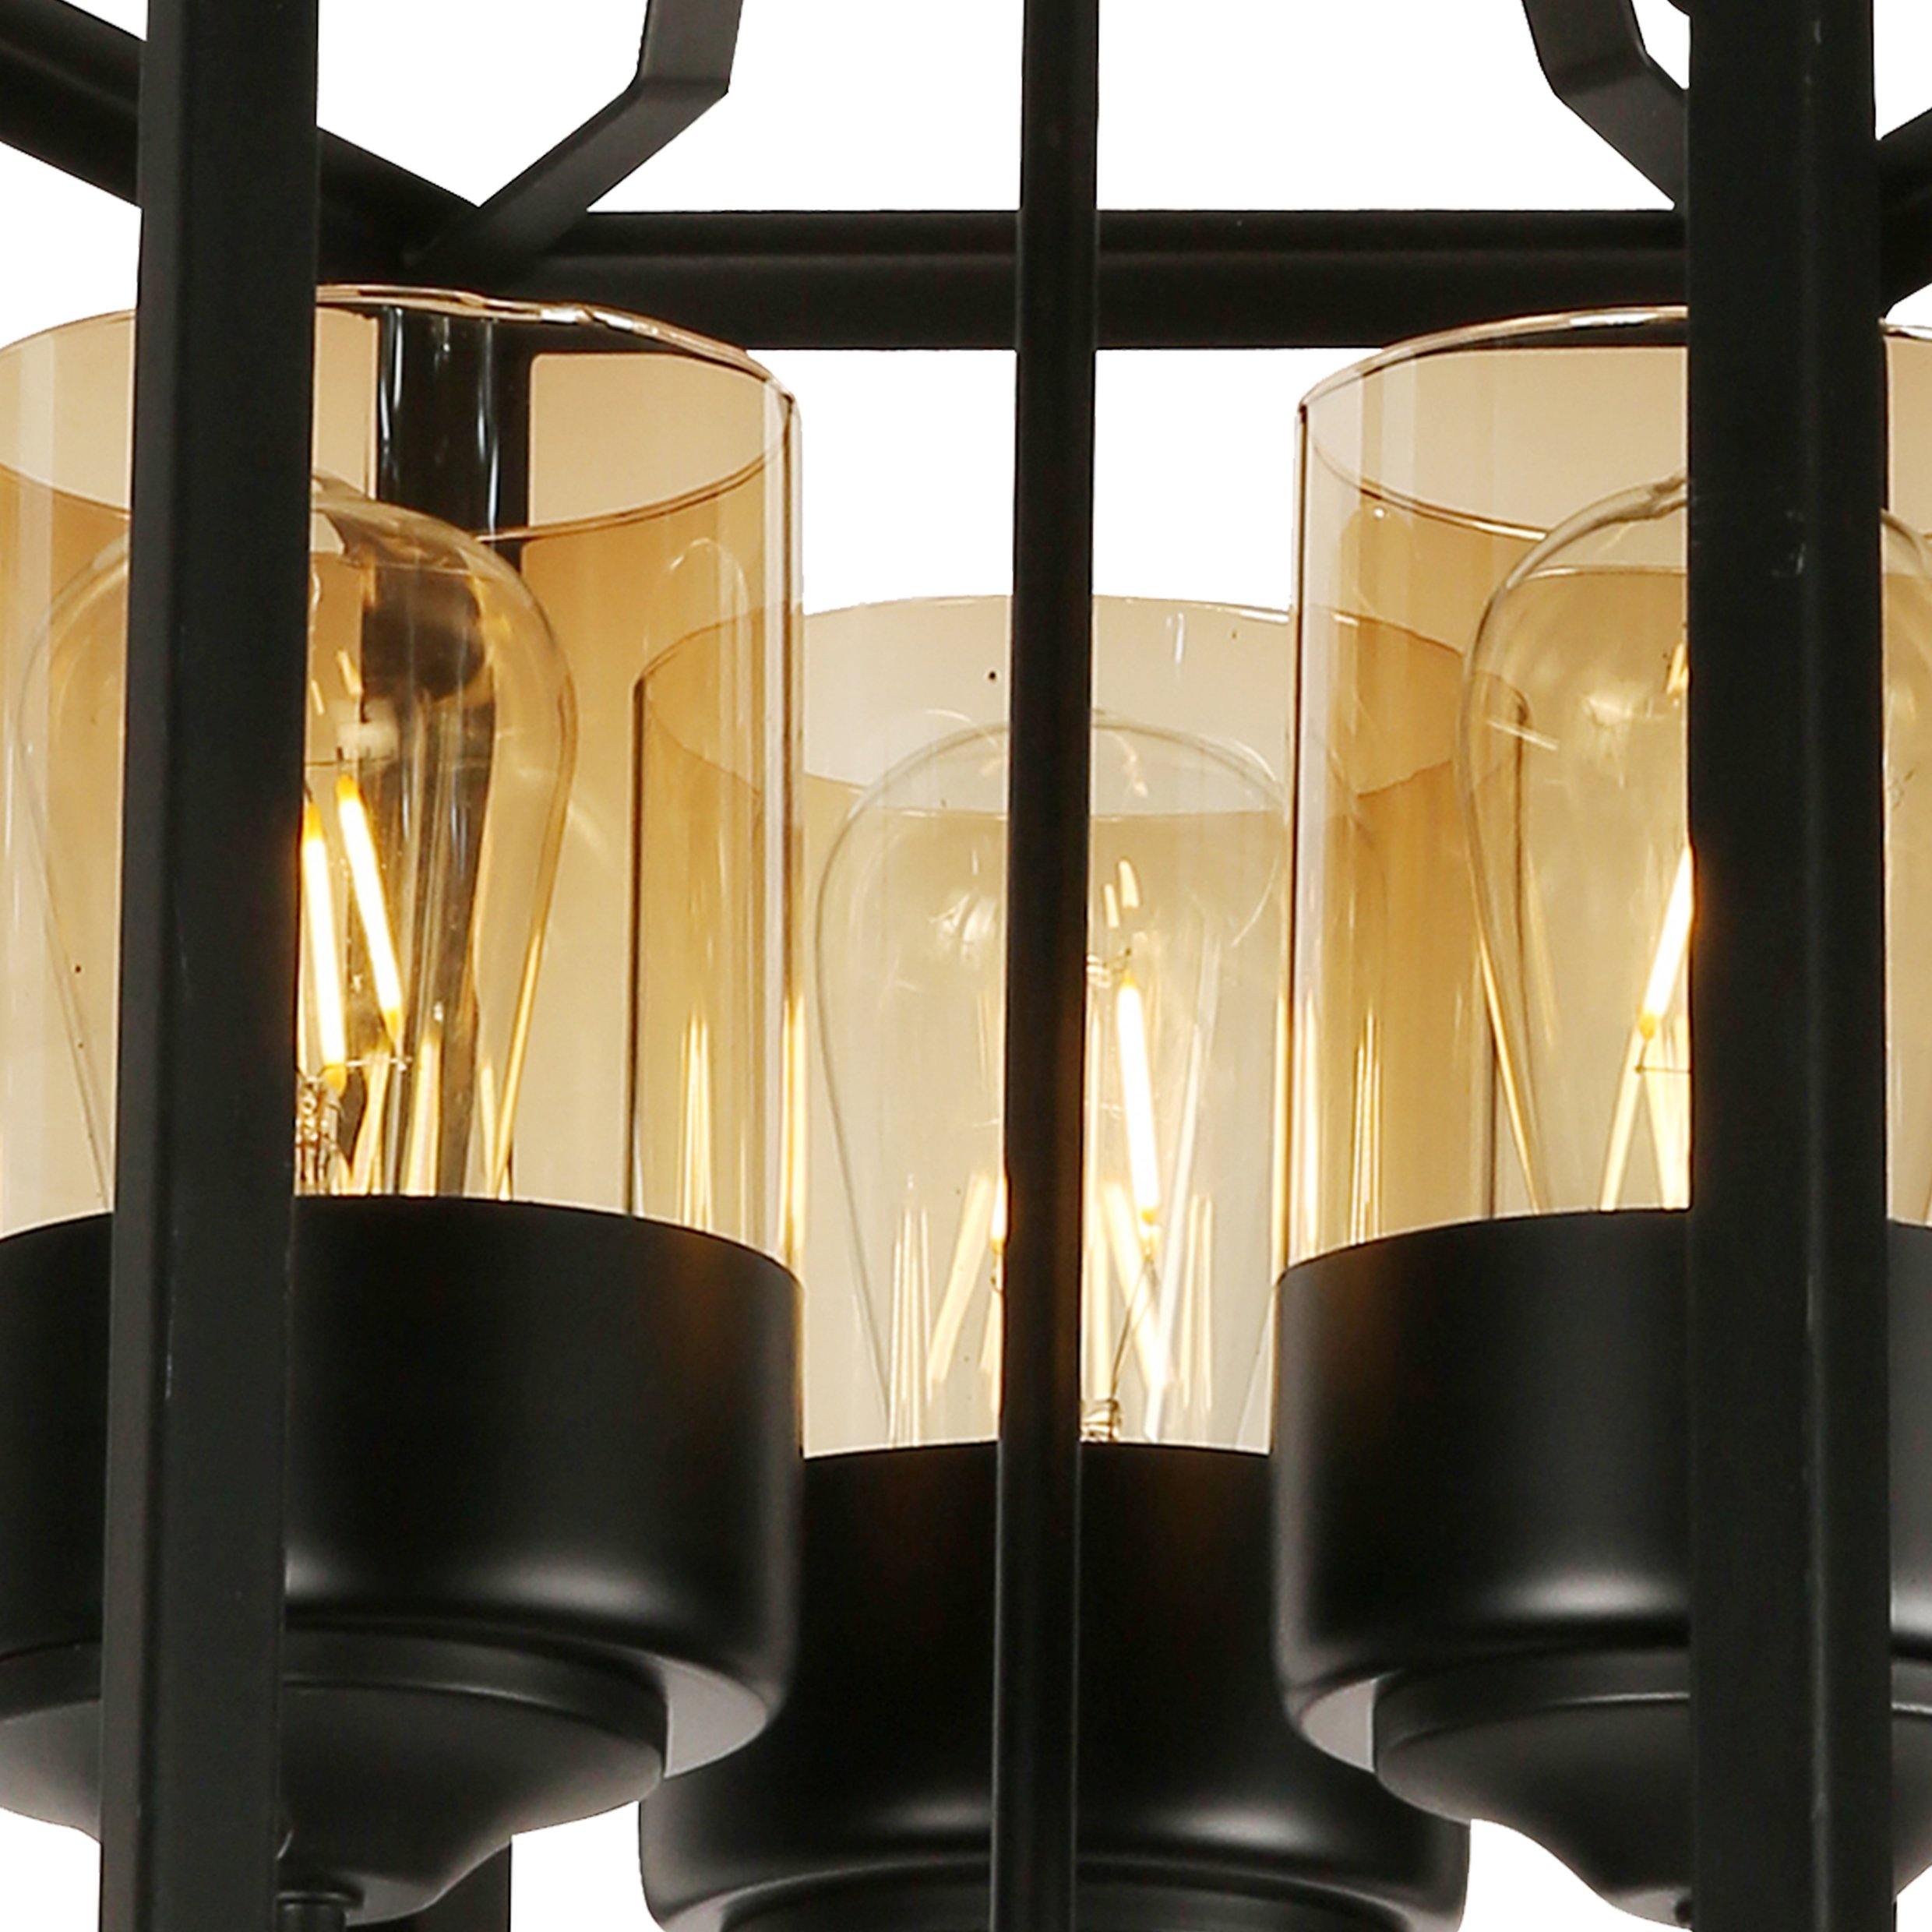 ANKUR UPTOWN 3 LIGHT BLACK METAL CAGE WITH AMBER/CHAMPAGNE GLASS CHANDELIER - Ankur Lighting